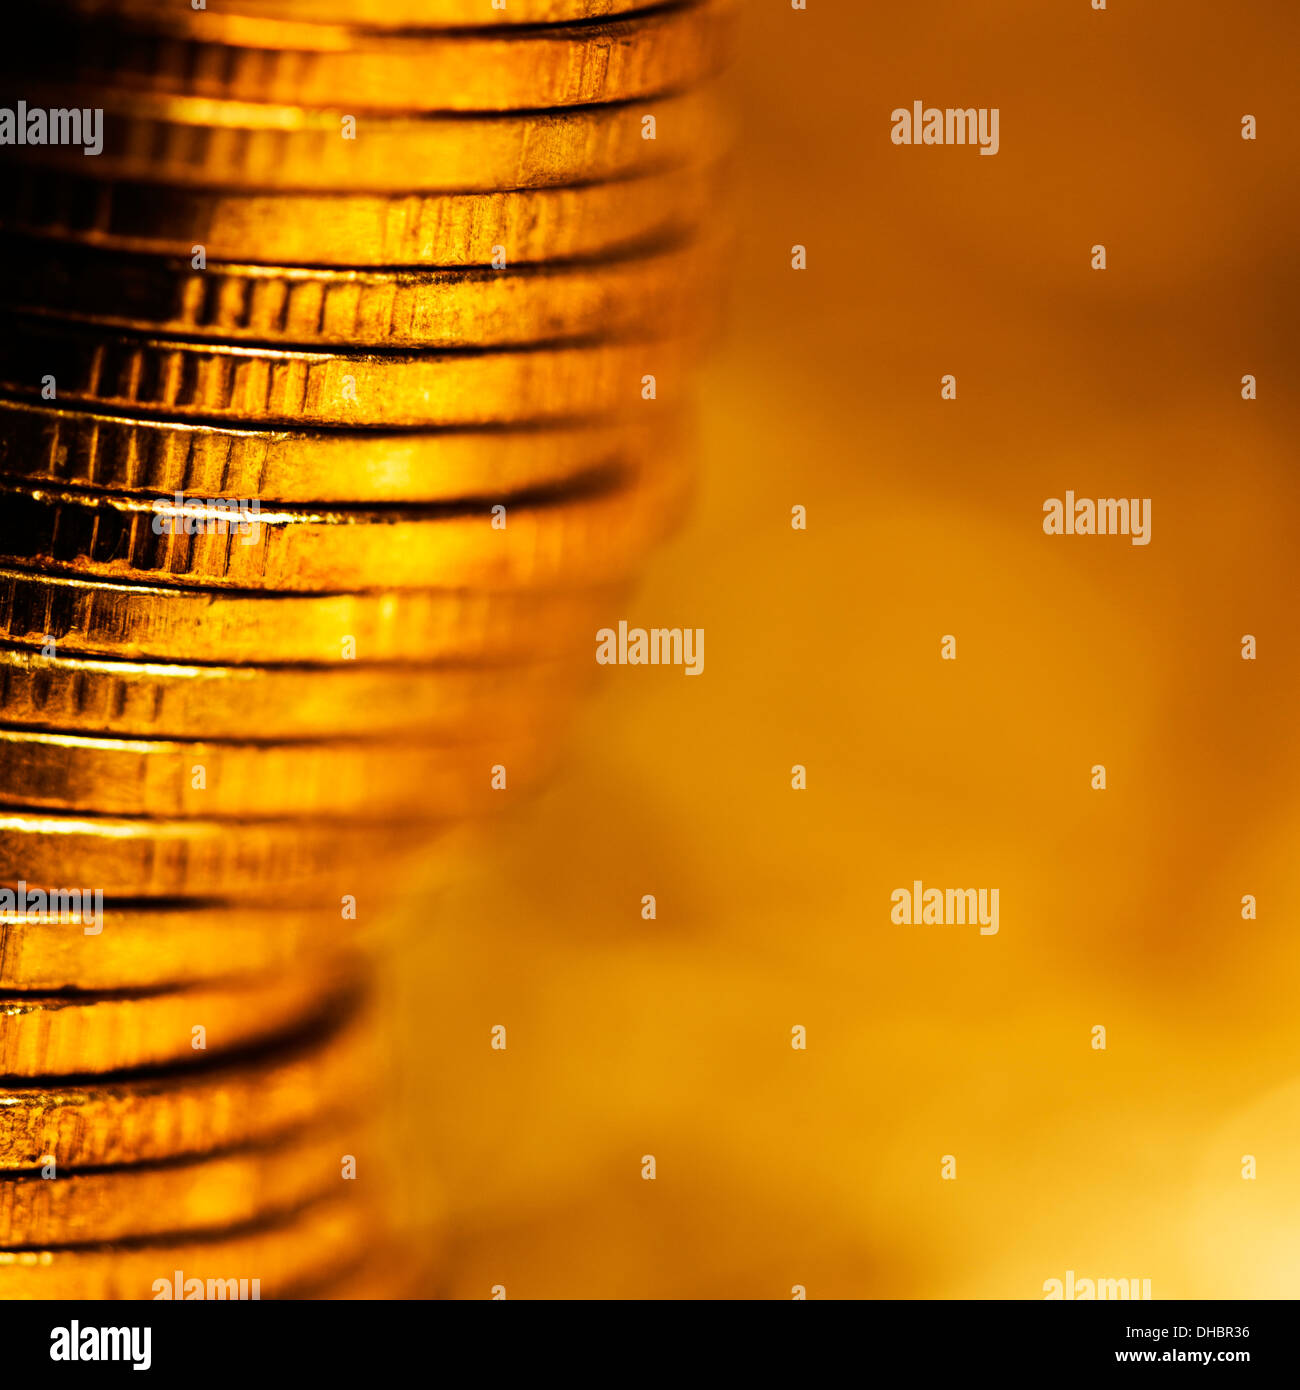 Shine of gold. Square composition, shallow DOF. Stock Photo